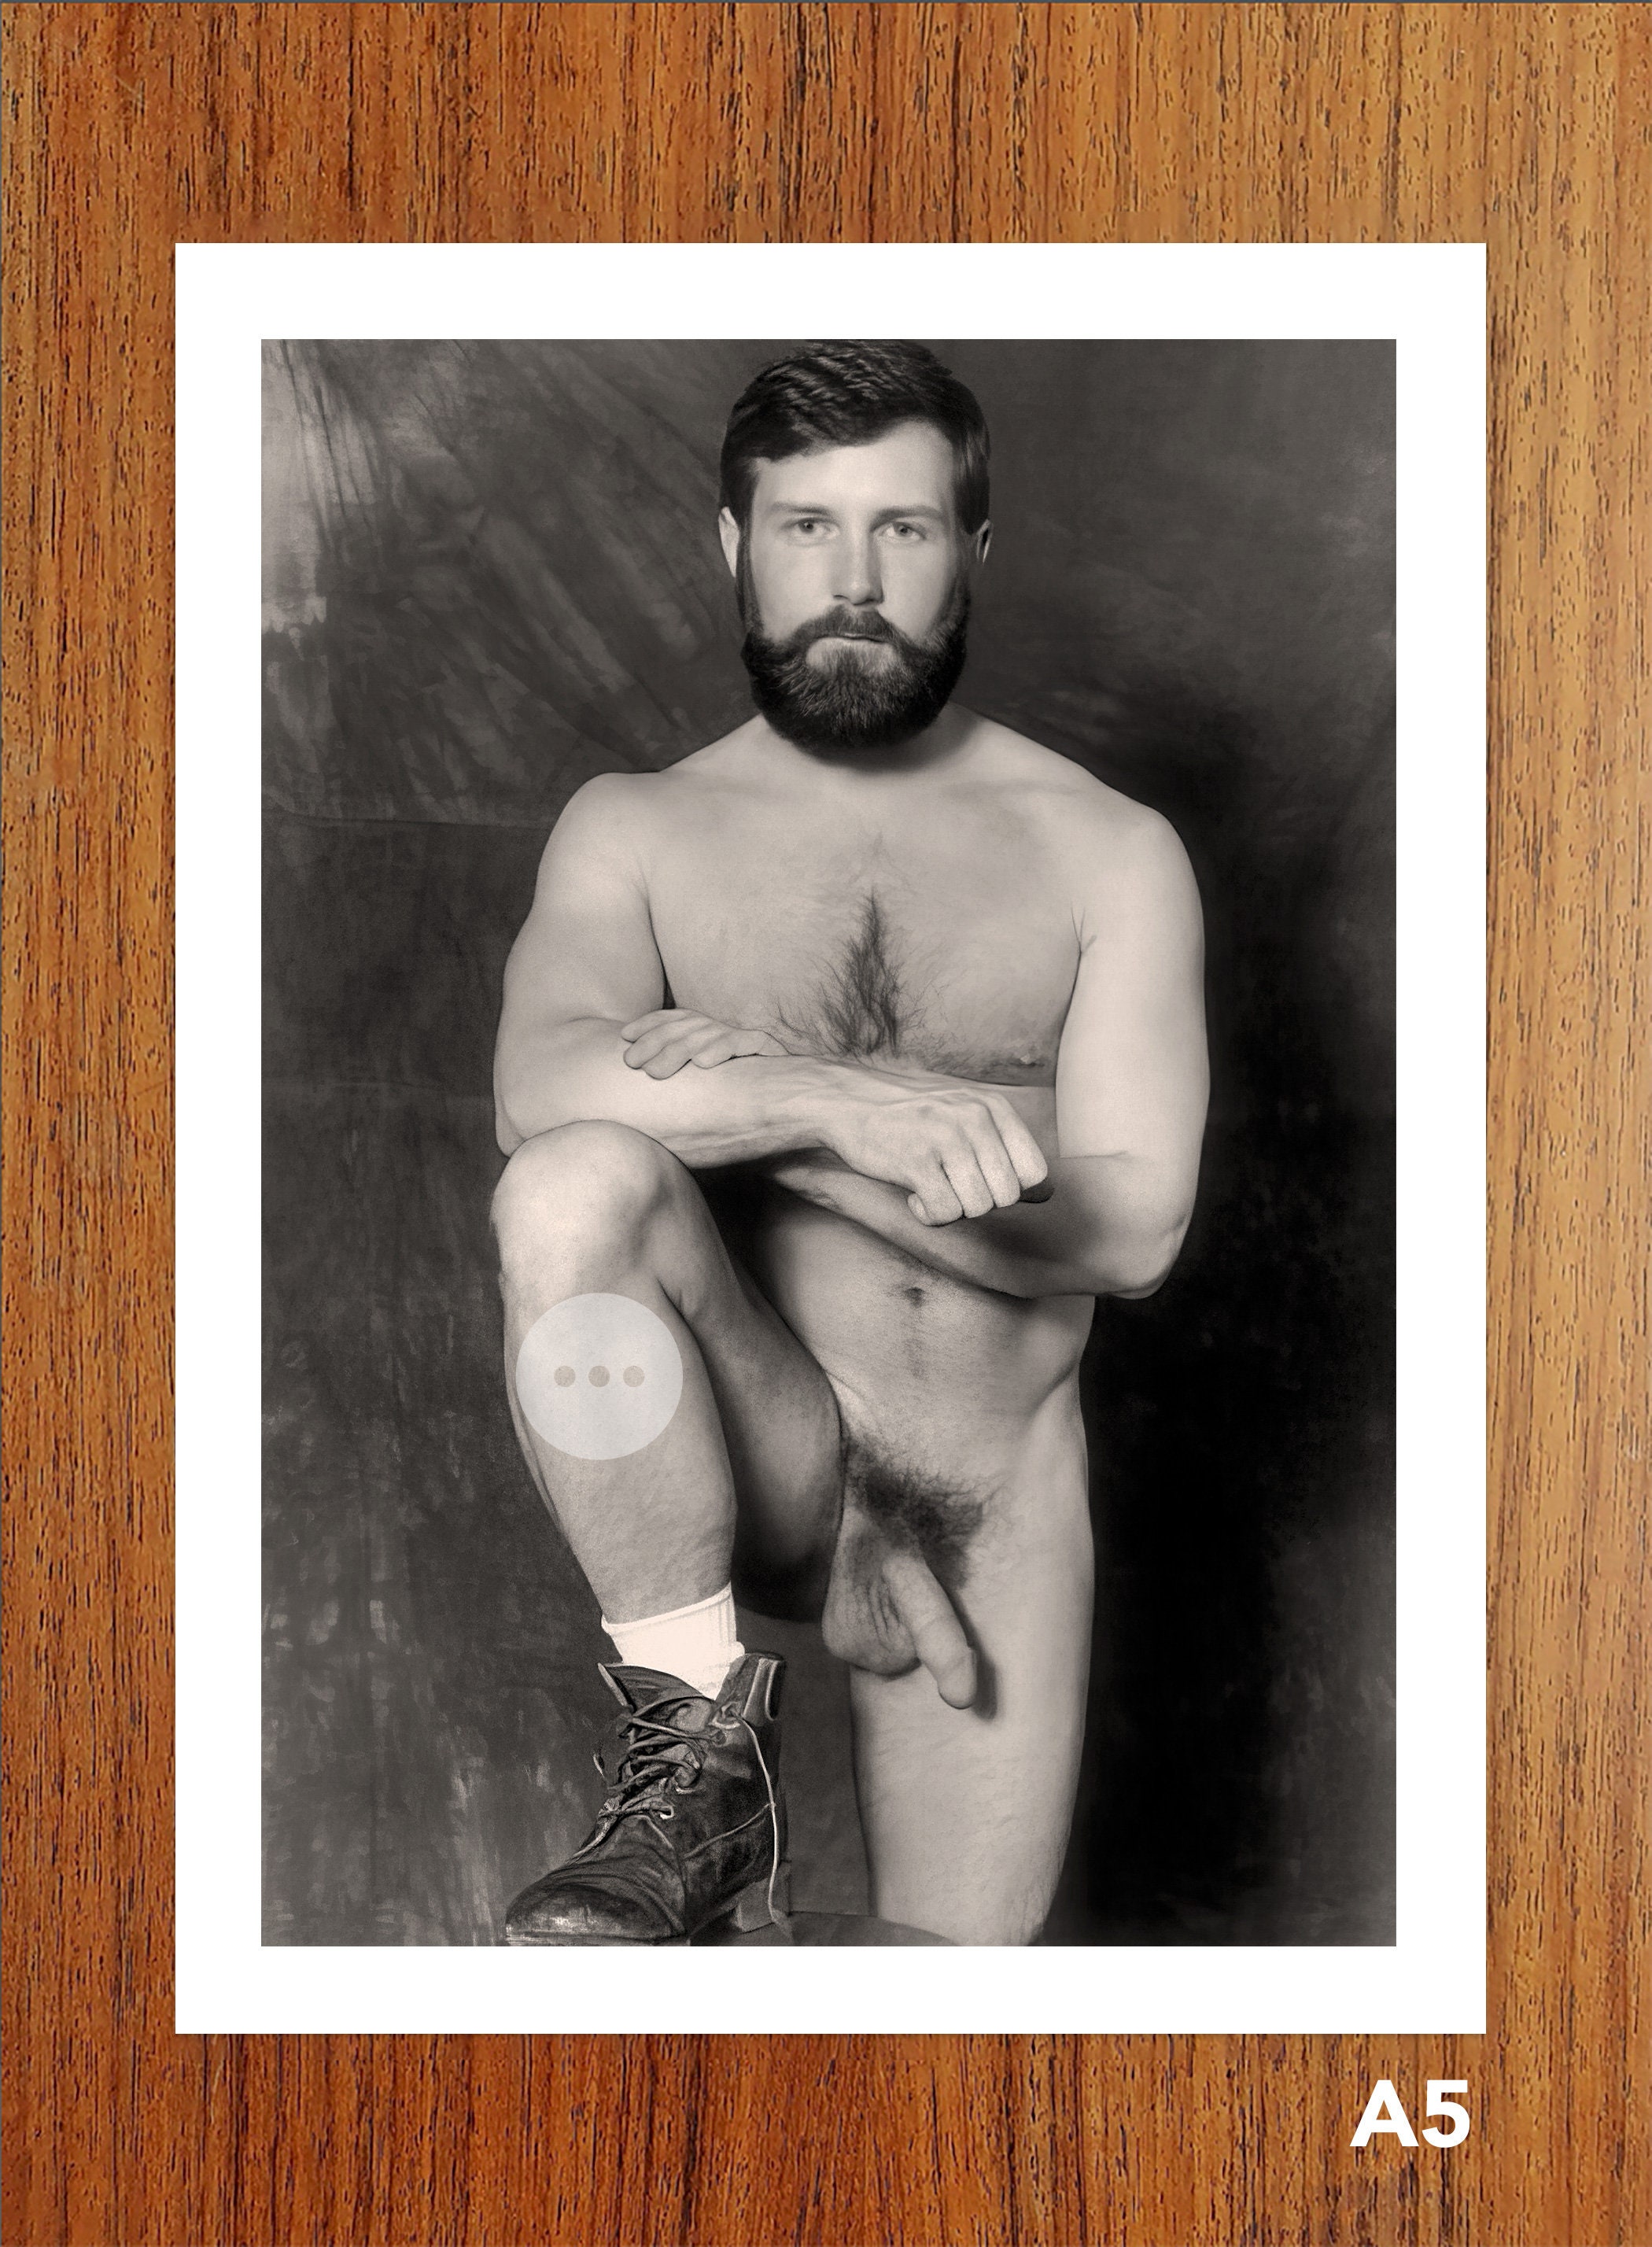 Male Nude Portrait of Bearded Man Full Frontal Nudity Erotic image